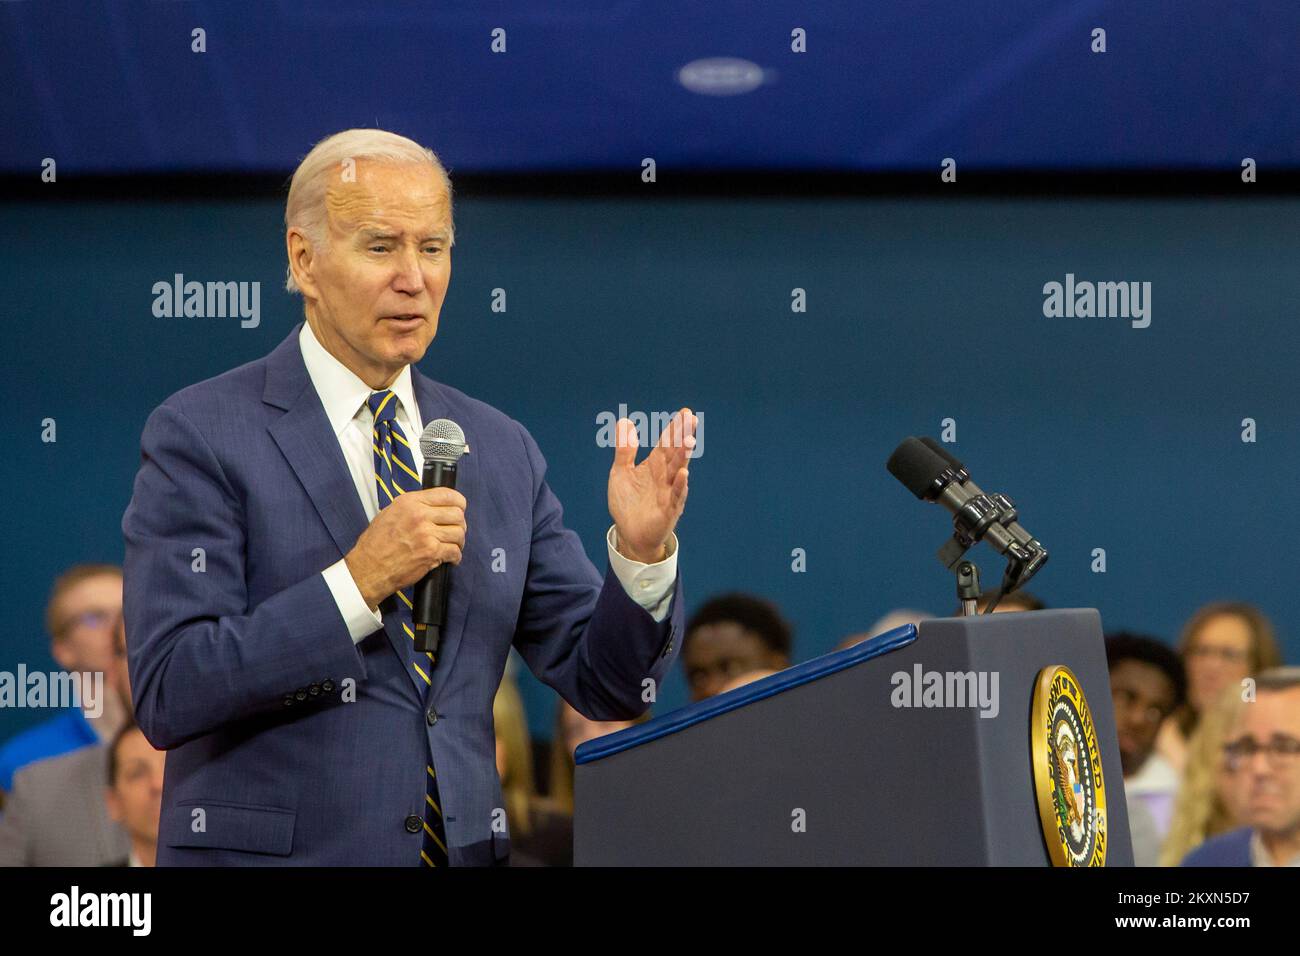 Bay City, Michigan, USA. 29th Nov, 2022. President Joe Biden visited the new SK Siltron microprocessor plant, which opened in September. He spoke about his administration's efforts to create good-paying manufacturing jobs. SK Siltron's chips are intended especially for use in electric vehicles. Credit: Jim West/Alamy Live News Stock Photo